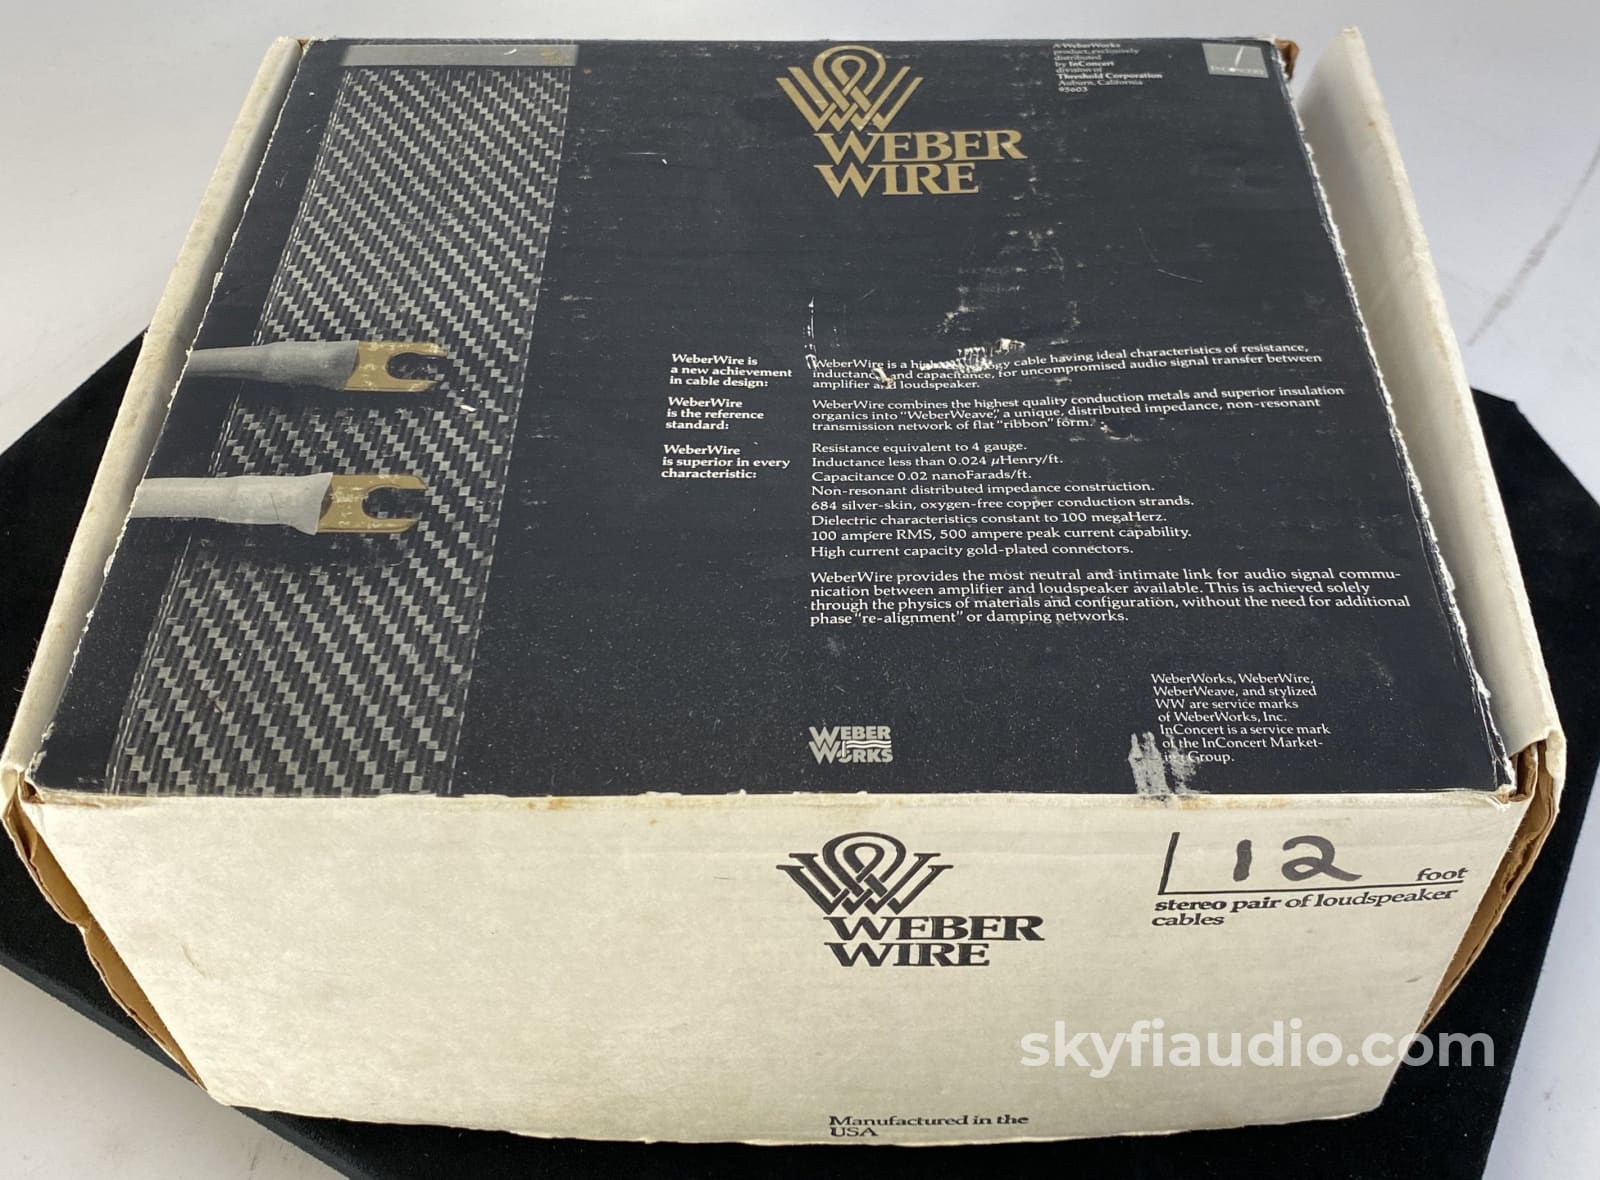 Weber Wire 12 Speaker Cables - New In Box Old Stock (Nos)!